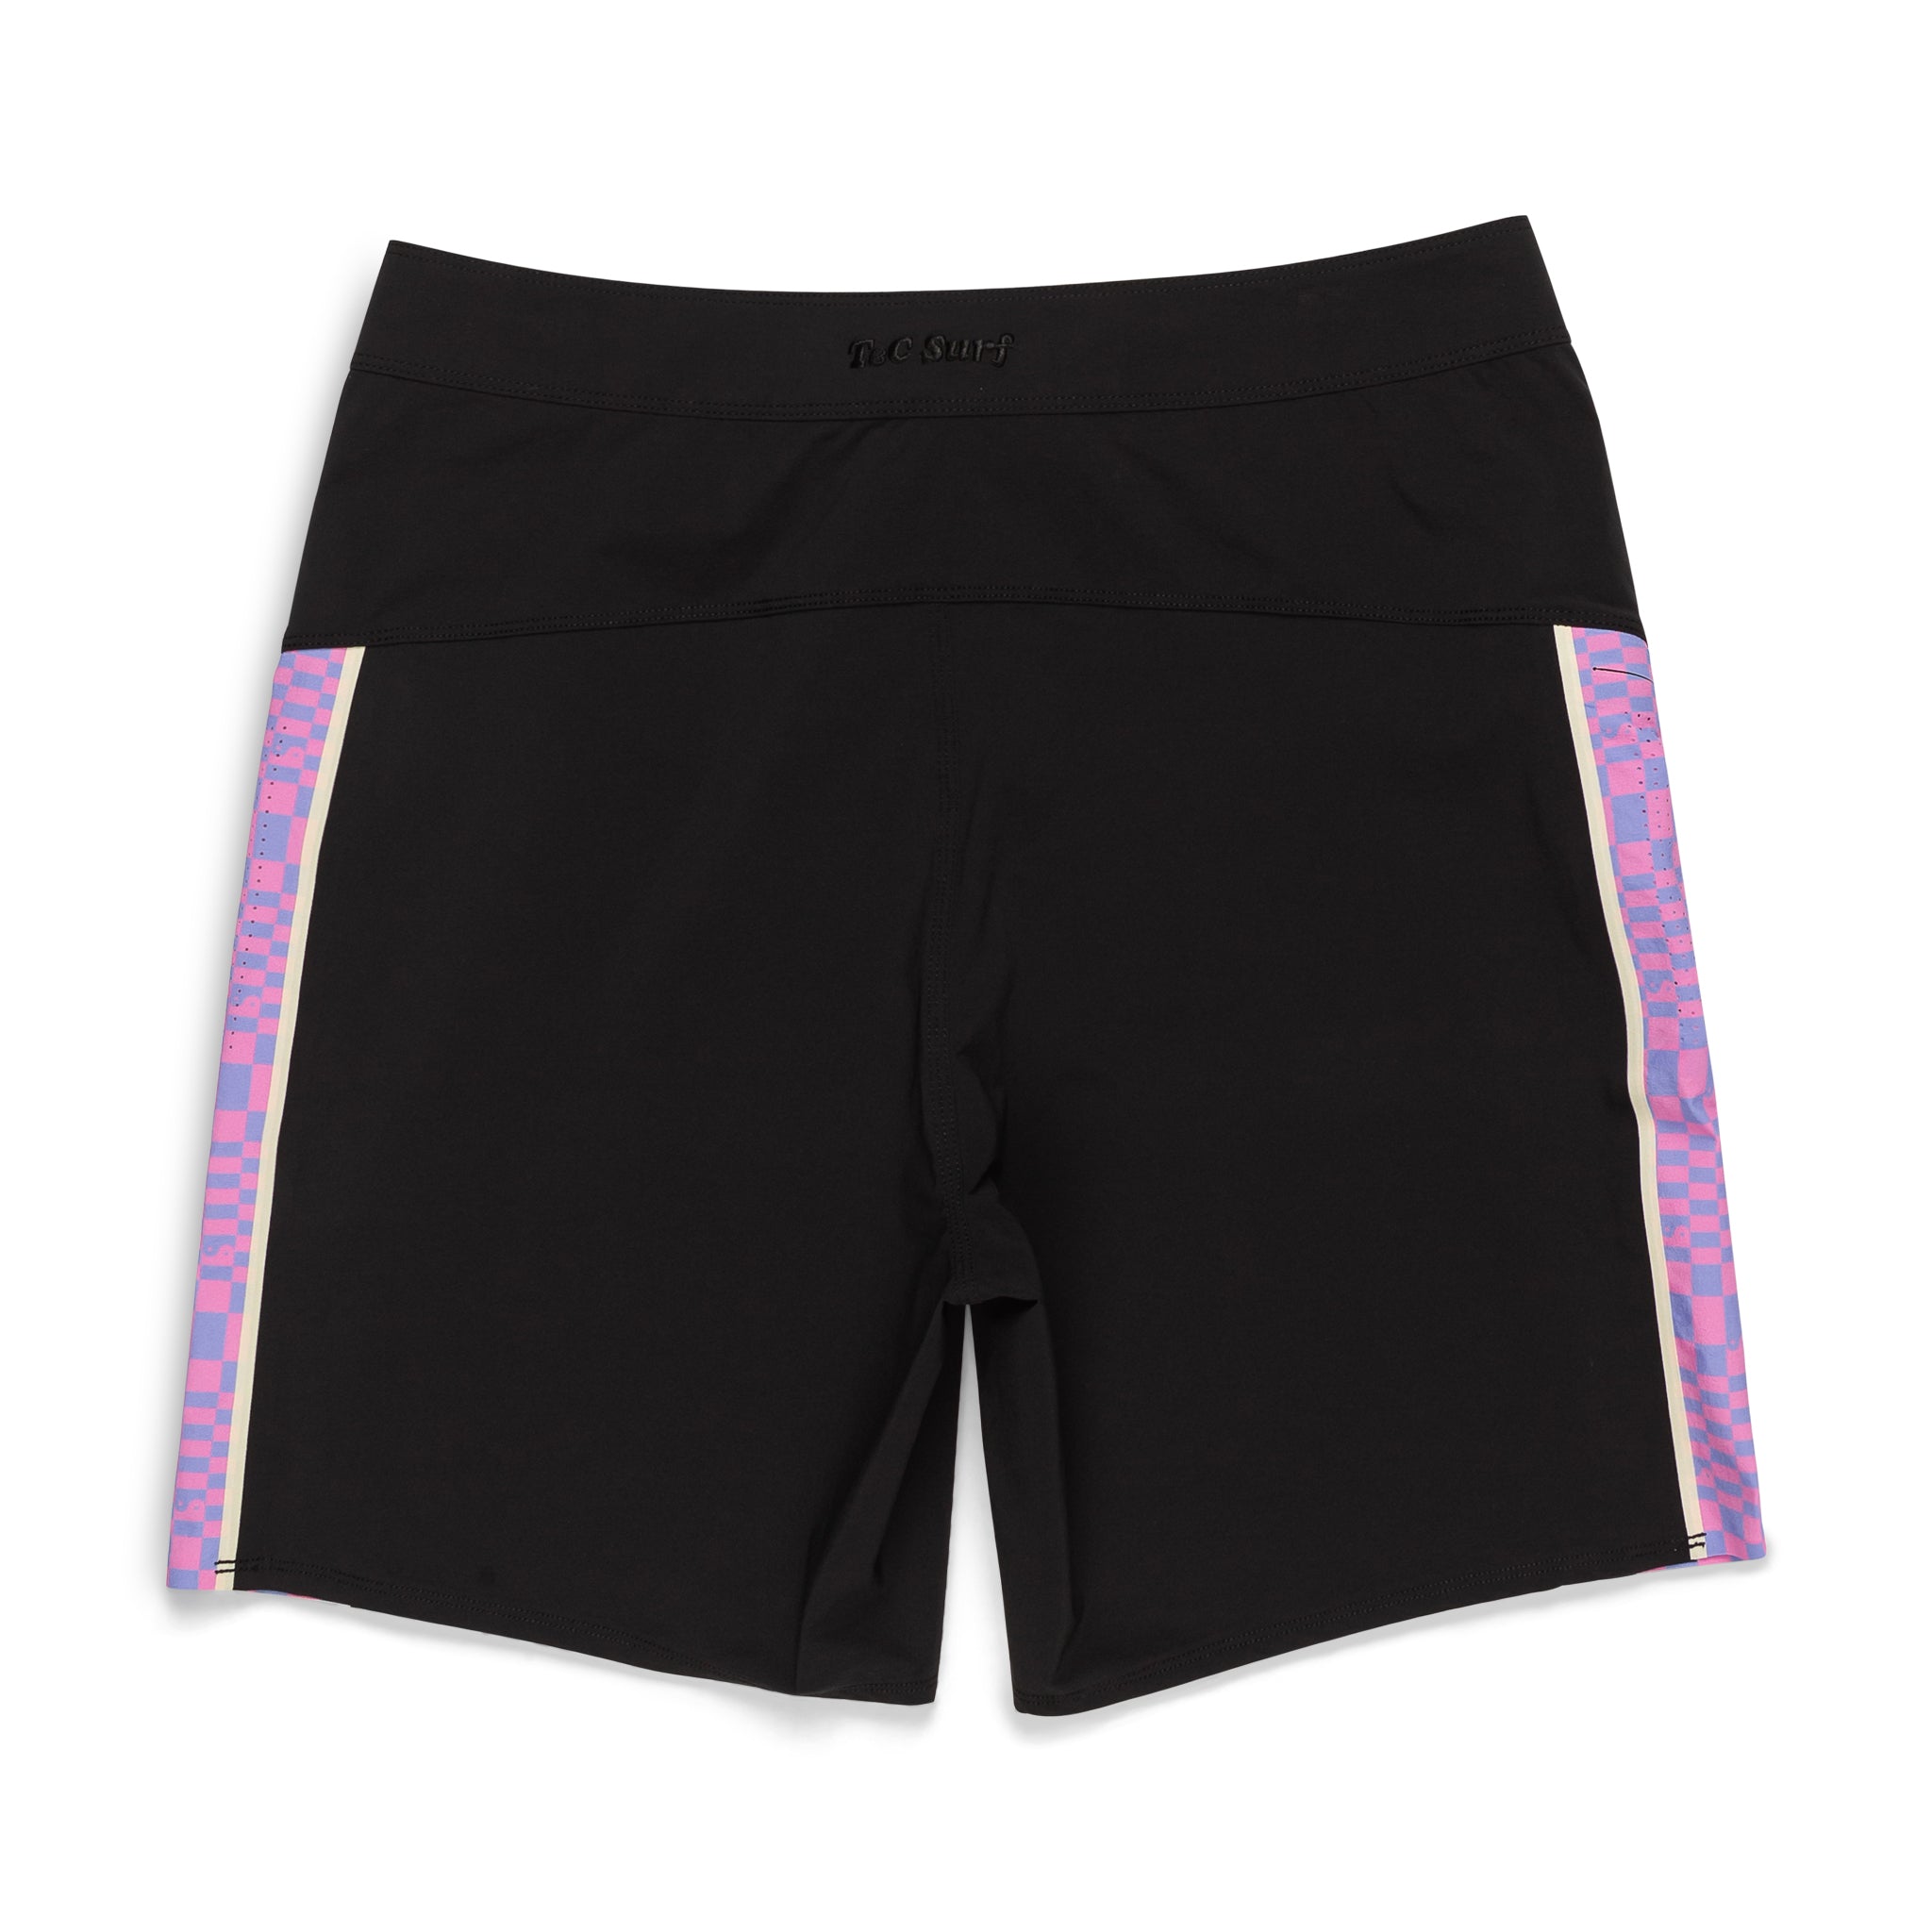 T&C Surf Designs STAY STOKED 19’’ Boardshorts Black